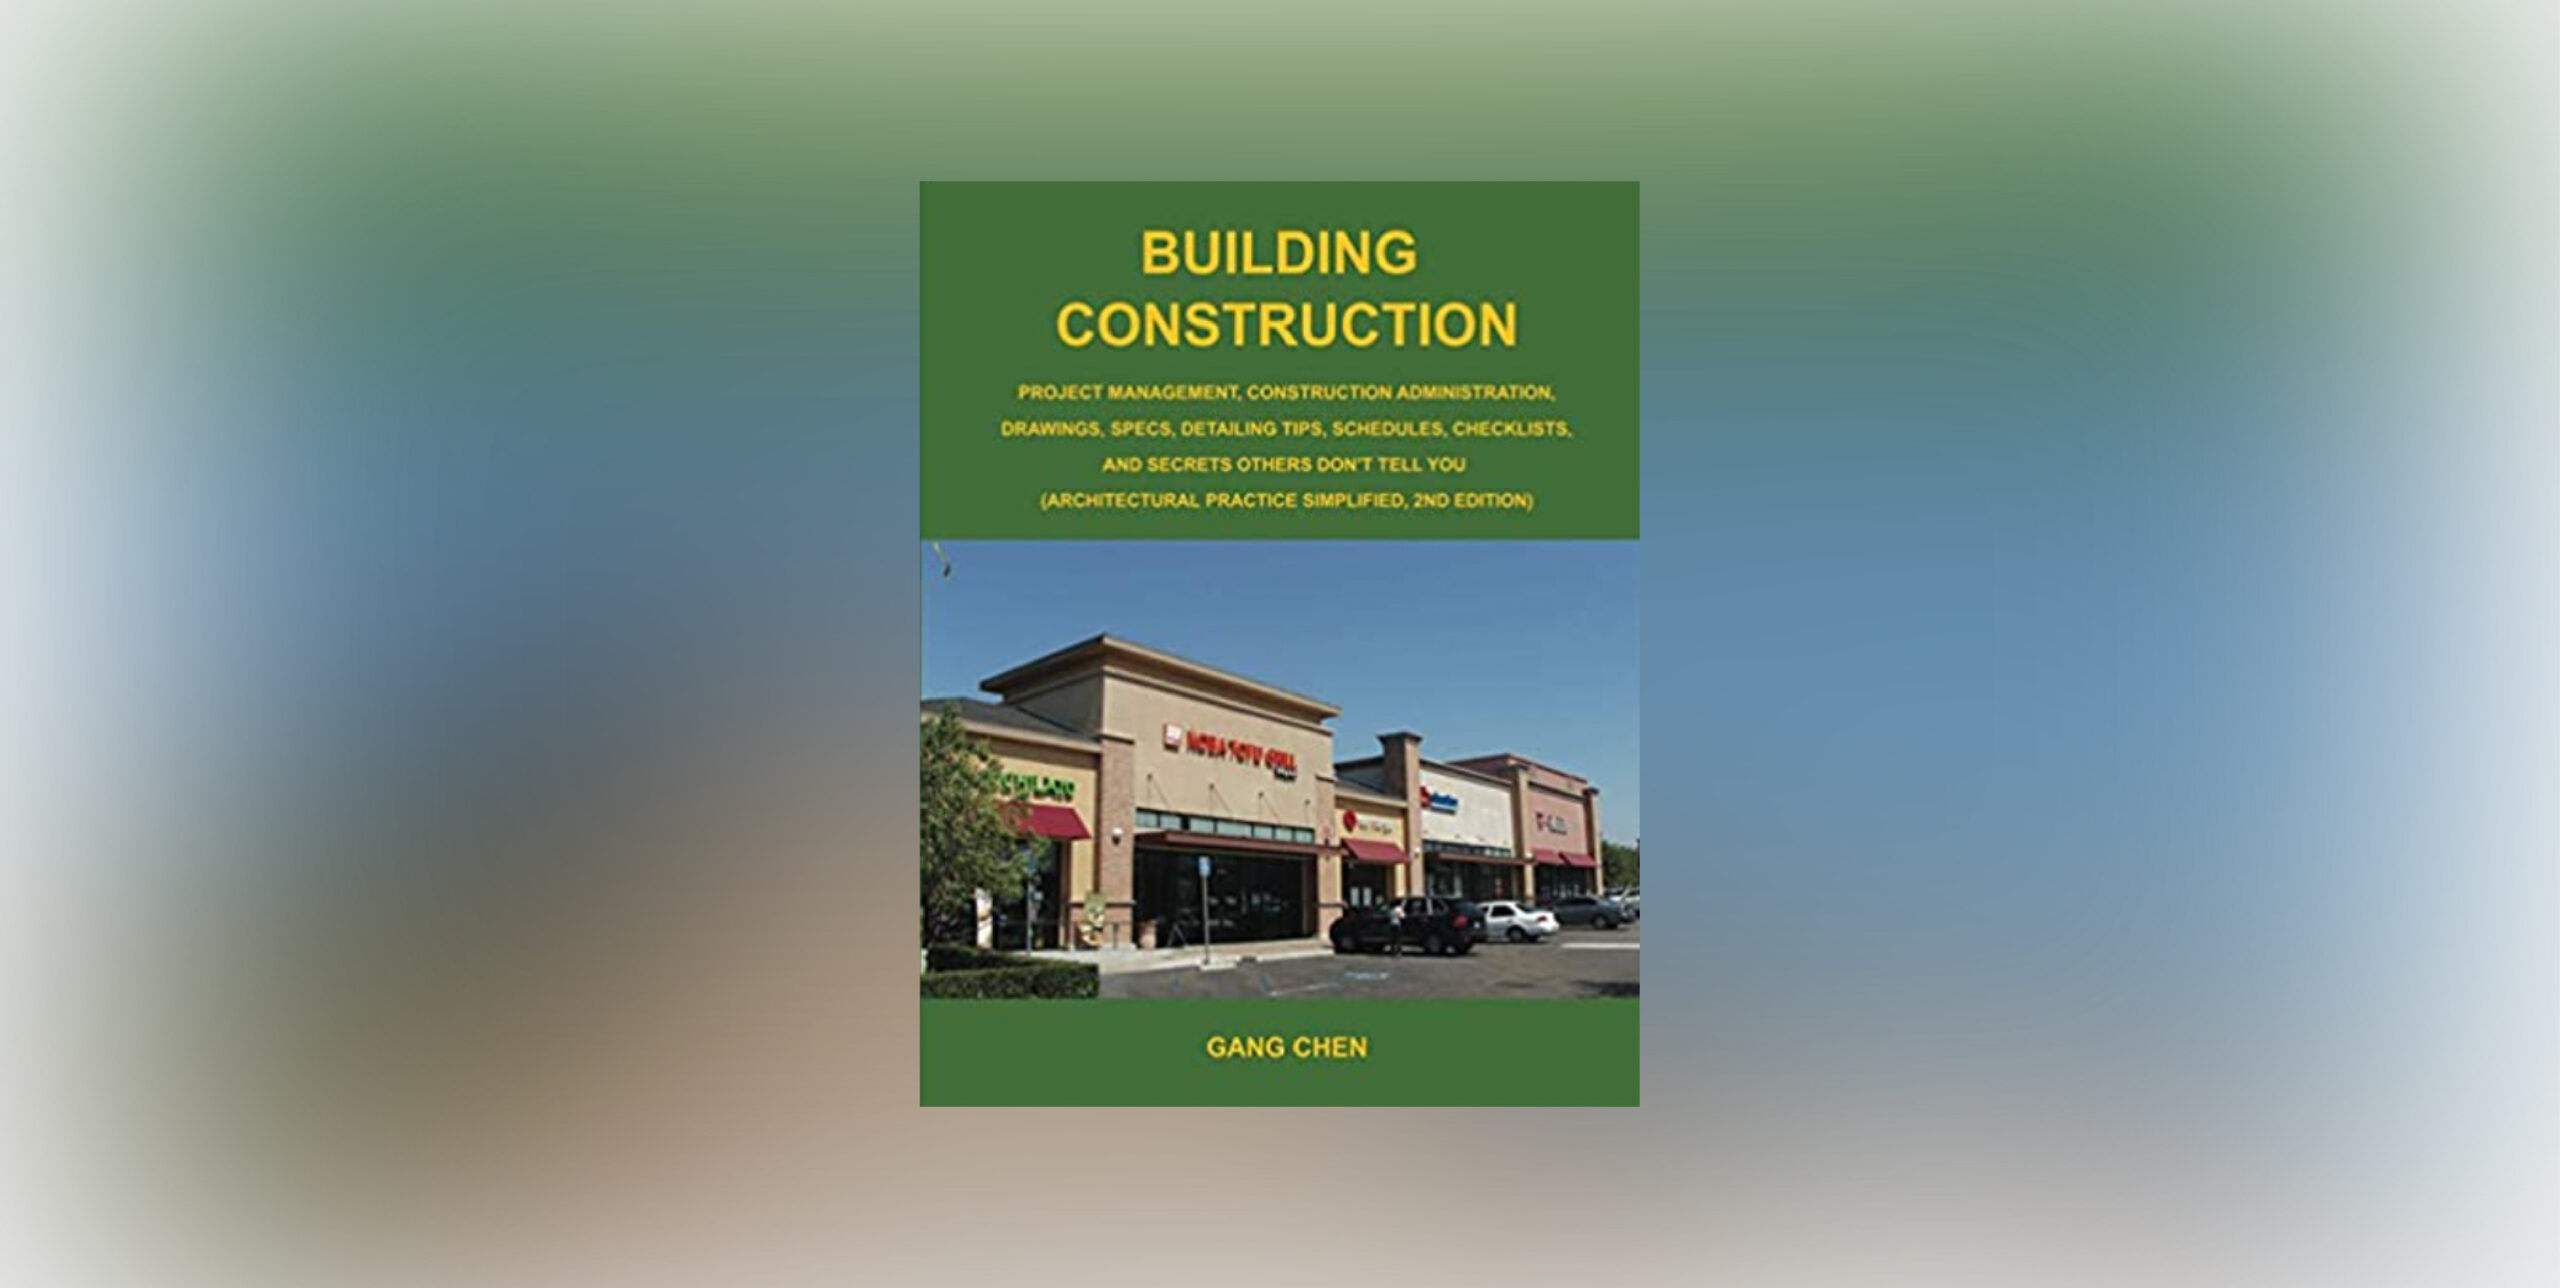 Building construction by Gang Chen book on green background